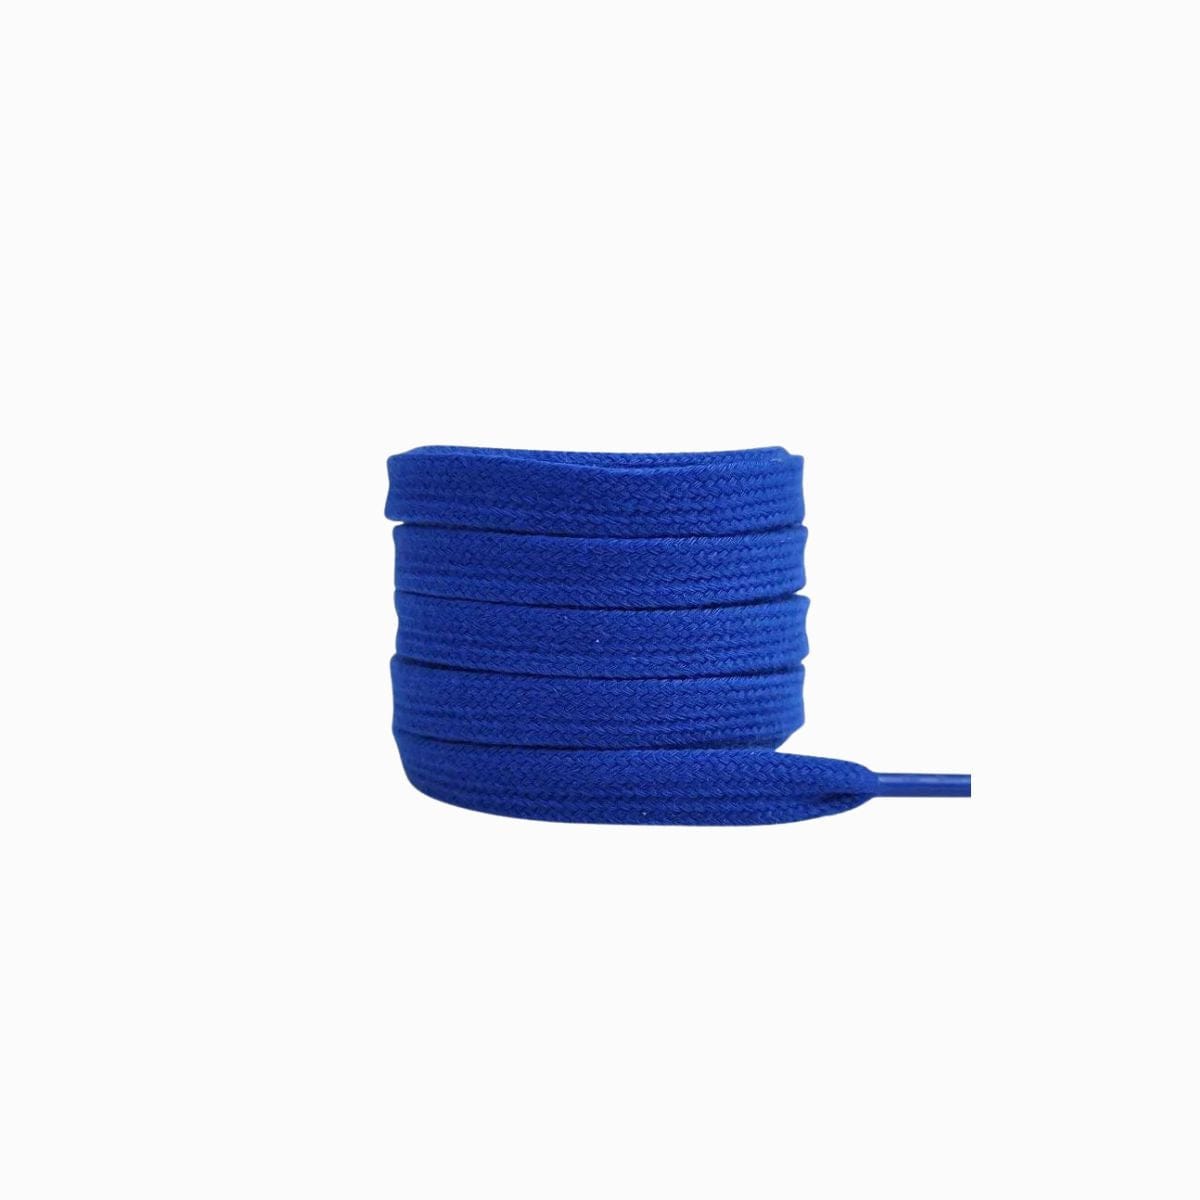 Royal Blue Replacement Shoe Laces for Adidas Samba Sneakers by Kicks Shoelaces